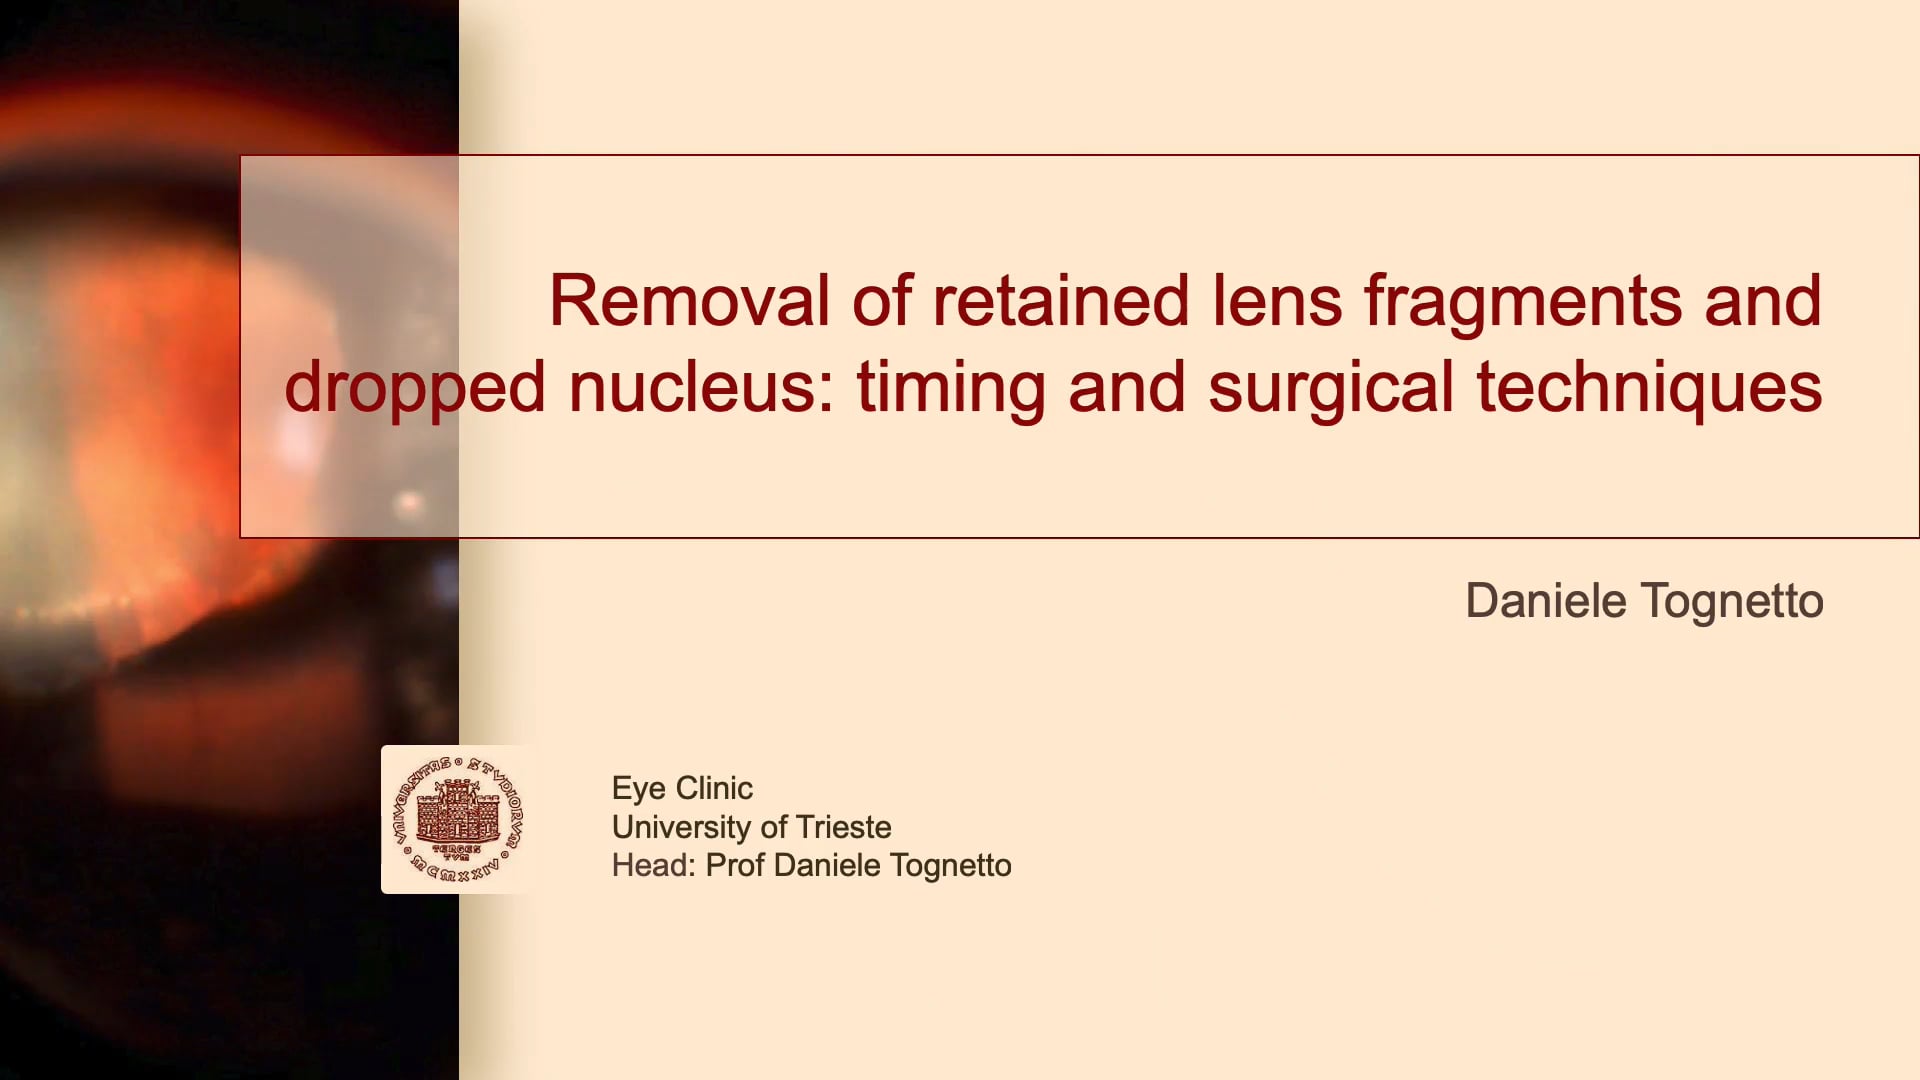 Removal Of Retained Lens Fragments And Dropped Nucleus: Timing And Surgical Techniques